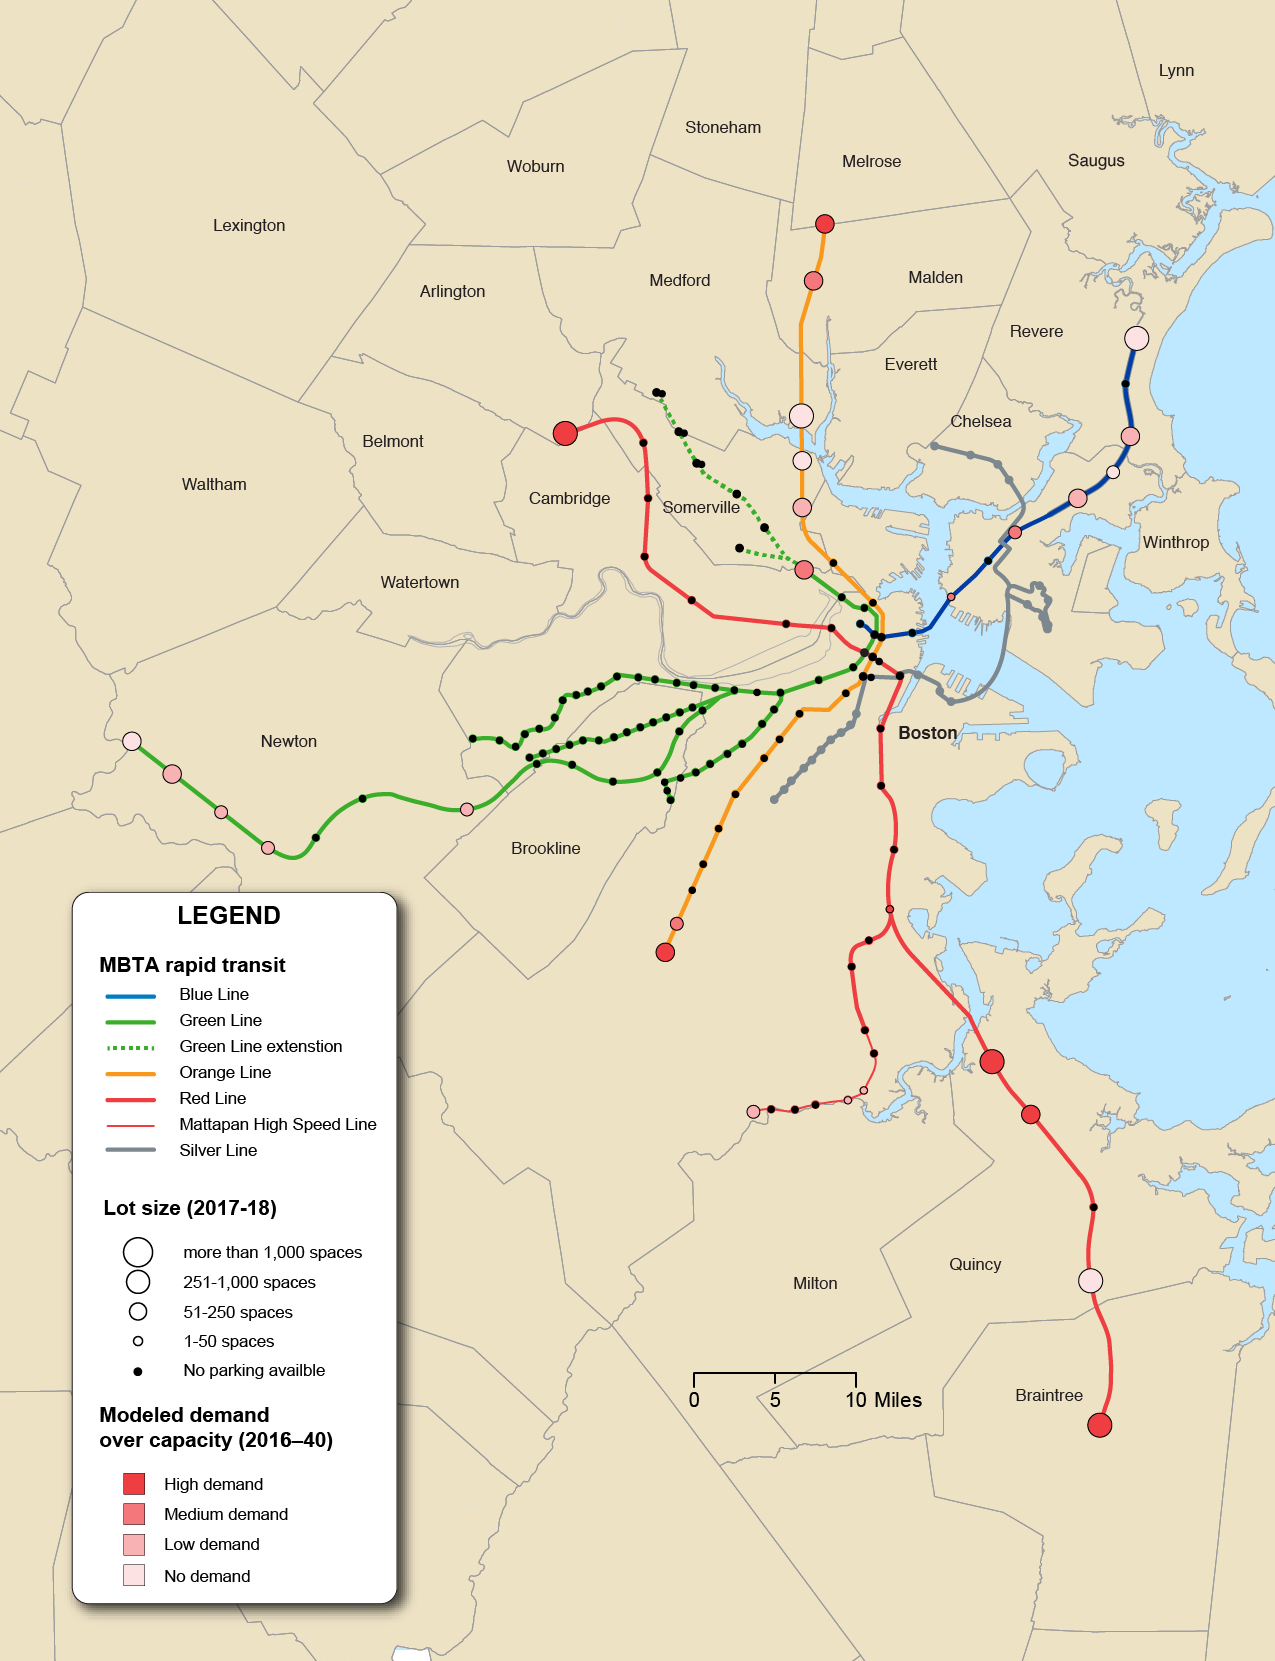 Figure 6-14 is a map of the Boston Region with MBTA Rapid Transit Lines. Figure 6-14 also shows points reflecting the Modeled Demand Over Capacity and Parking Lot Size together.